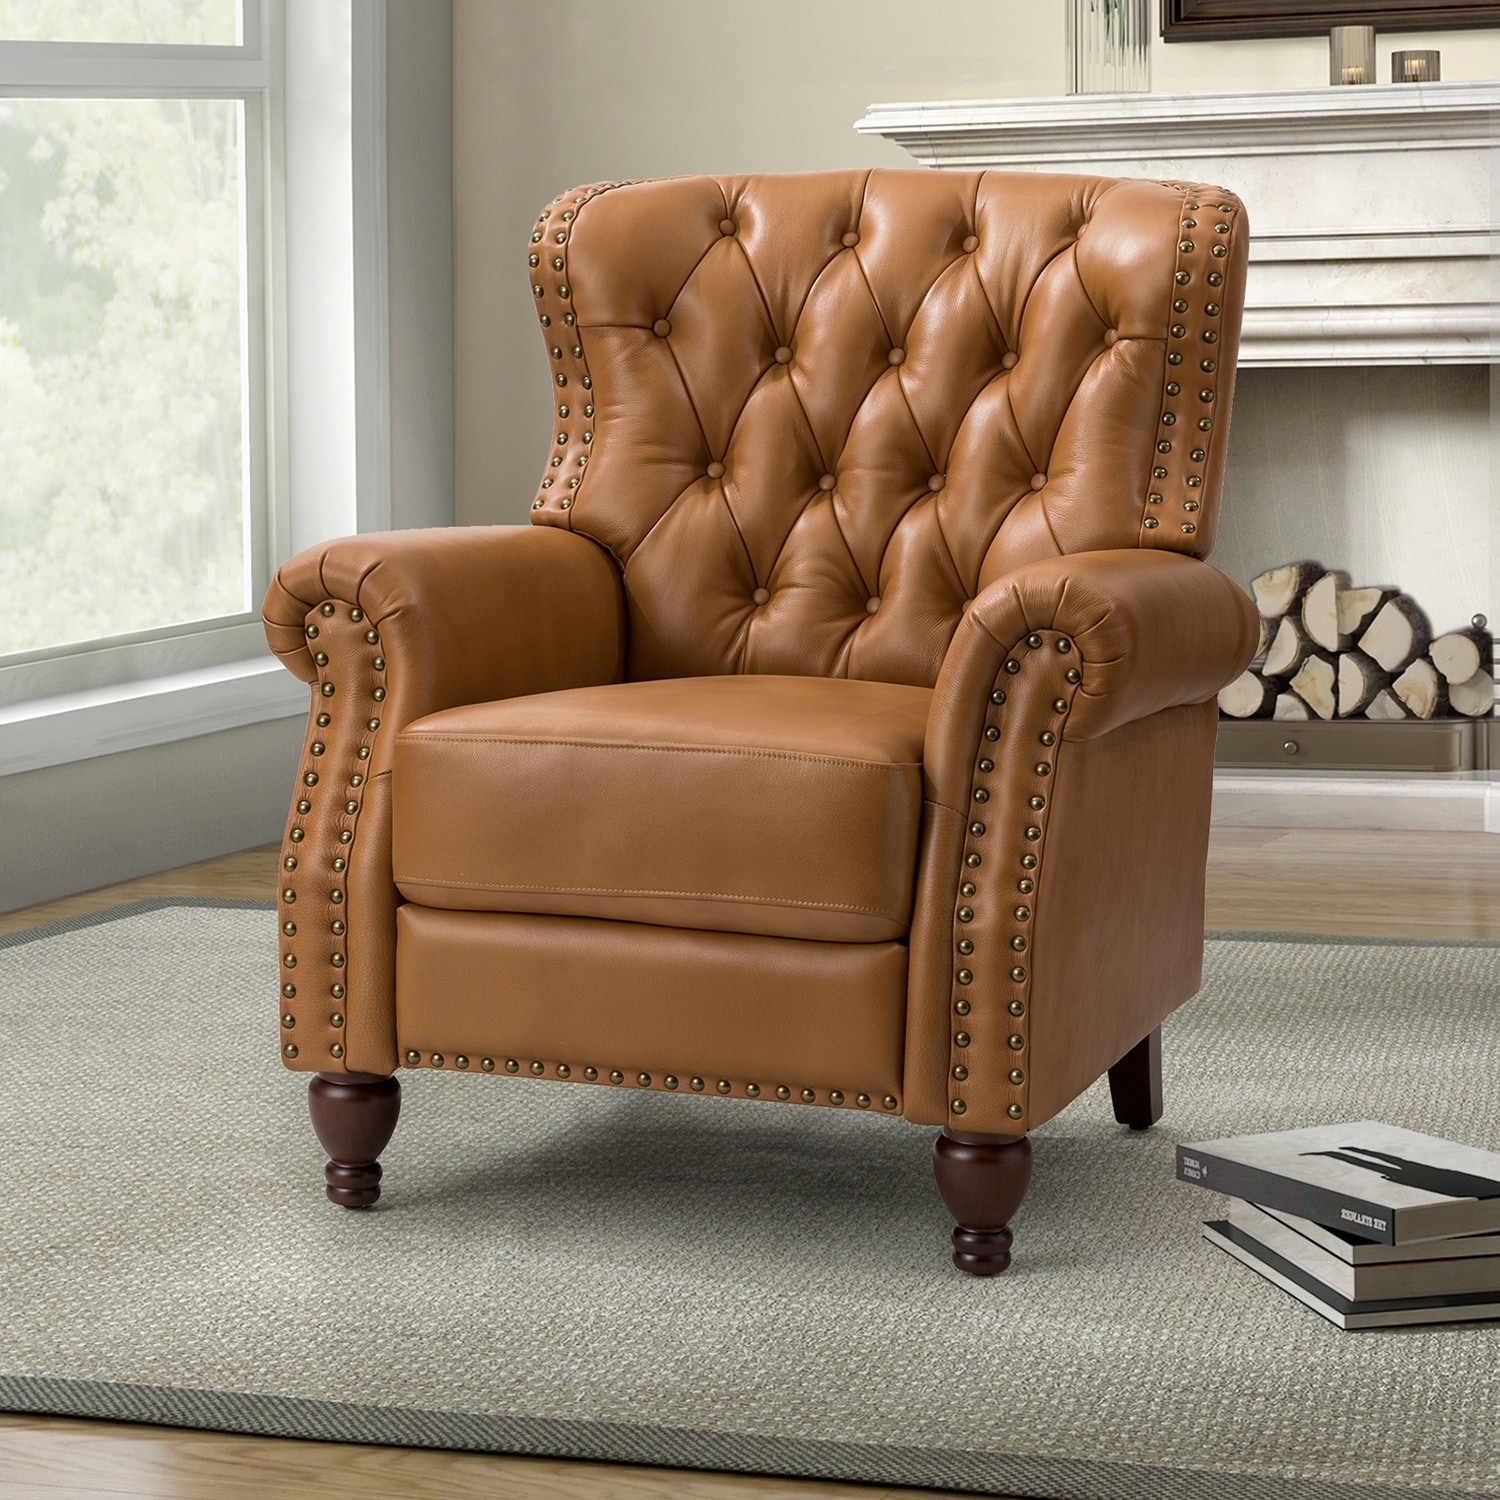 Barcalounger Mission (Craftsman II) Recliner Chair - Leather